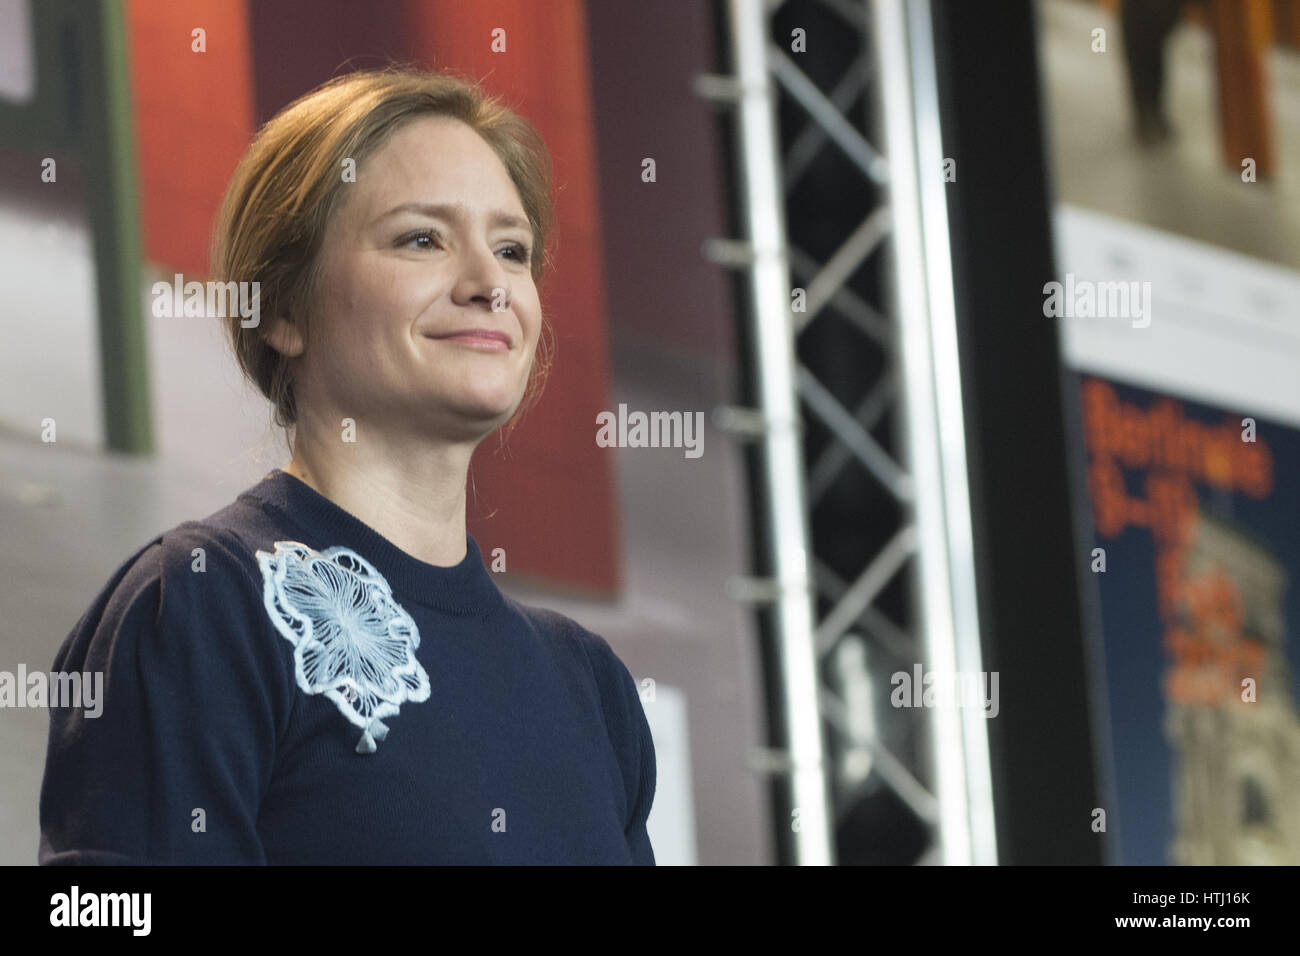 Members of the Jury attend a photocall and press conference to open the 67th Berlinale Film Festival in Berlin.  Featuring: Julia Jentsch Where: Berlin, Germany When: 09 Feb 2017 Stock Photo